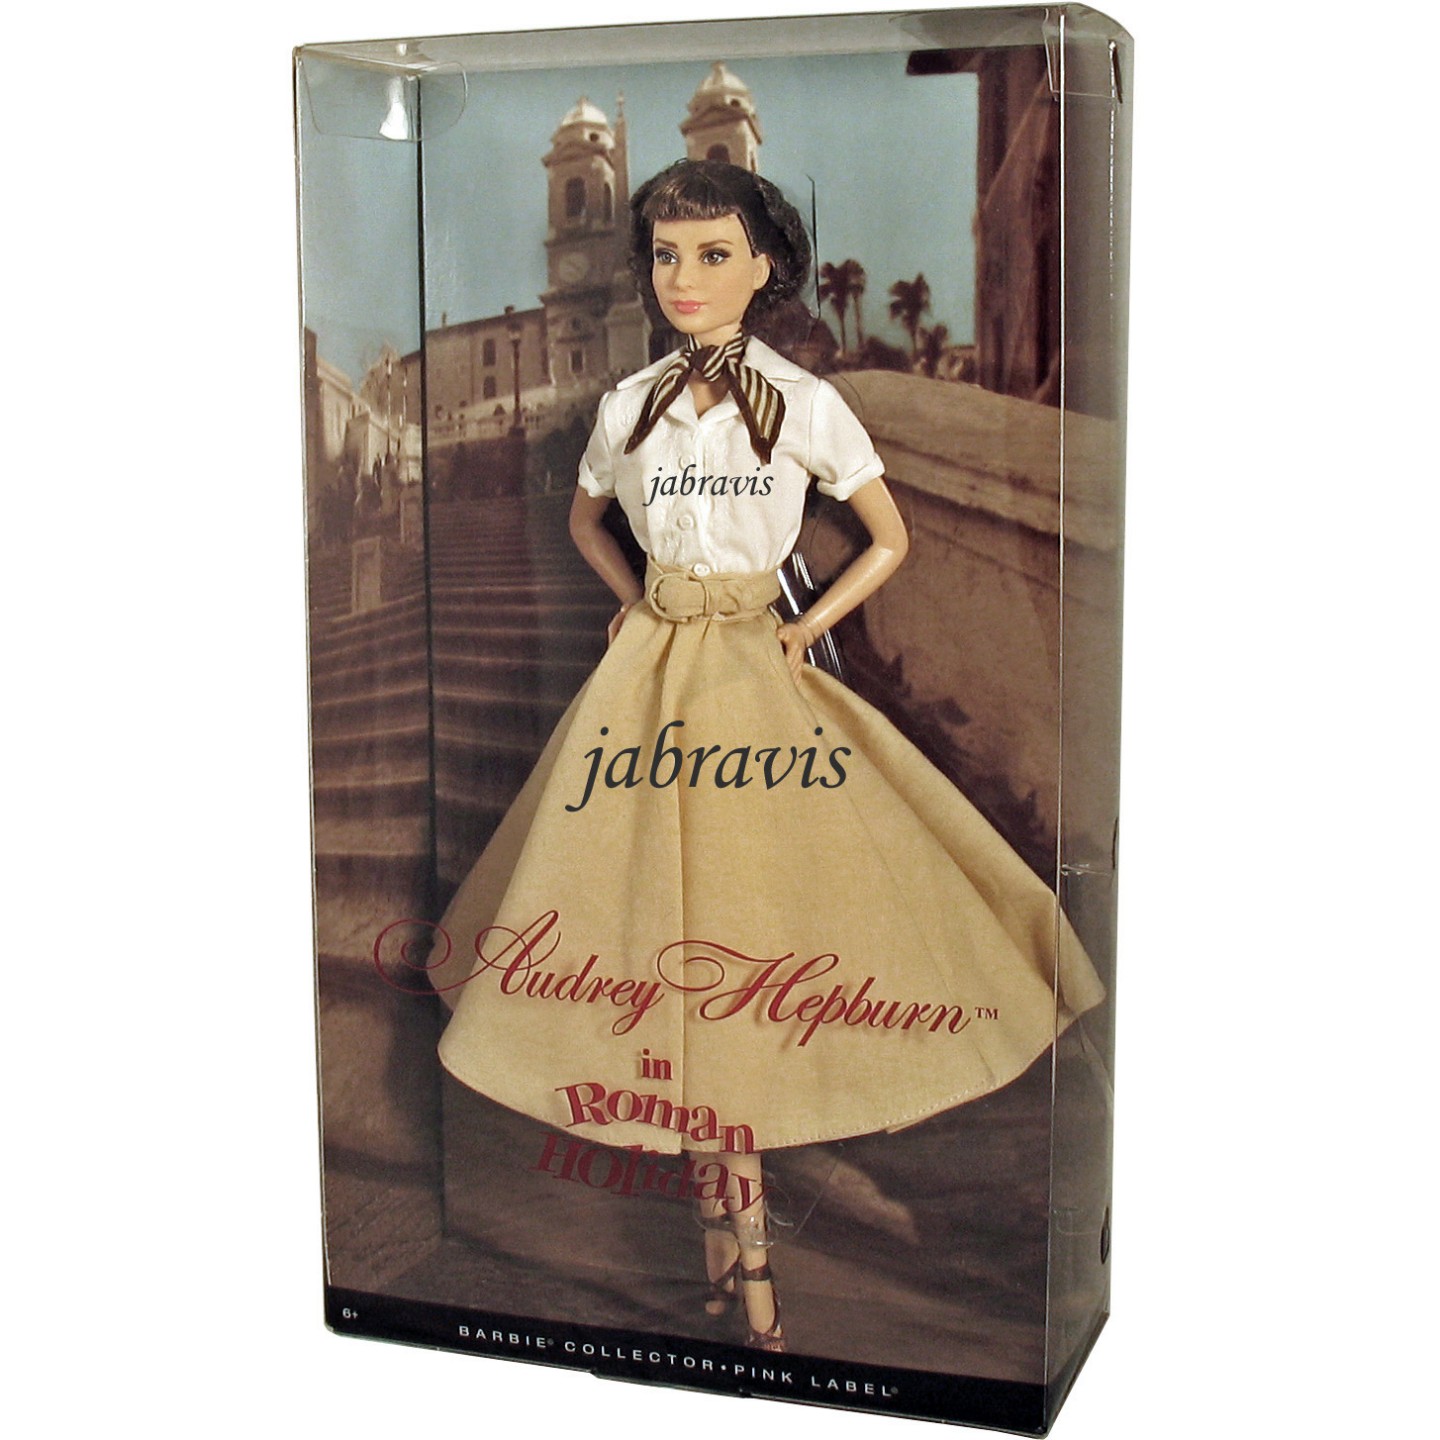 Barbie Collector • 2013 AUDREY HEPBURN in ROMAN HOLIDAY Doll • NRFB